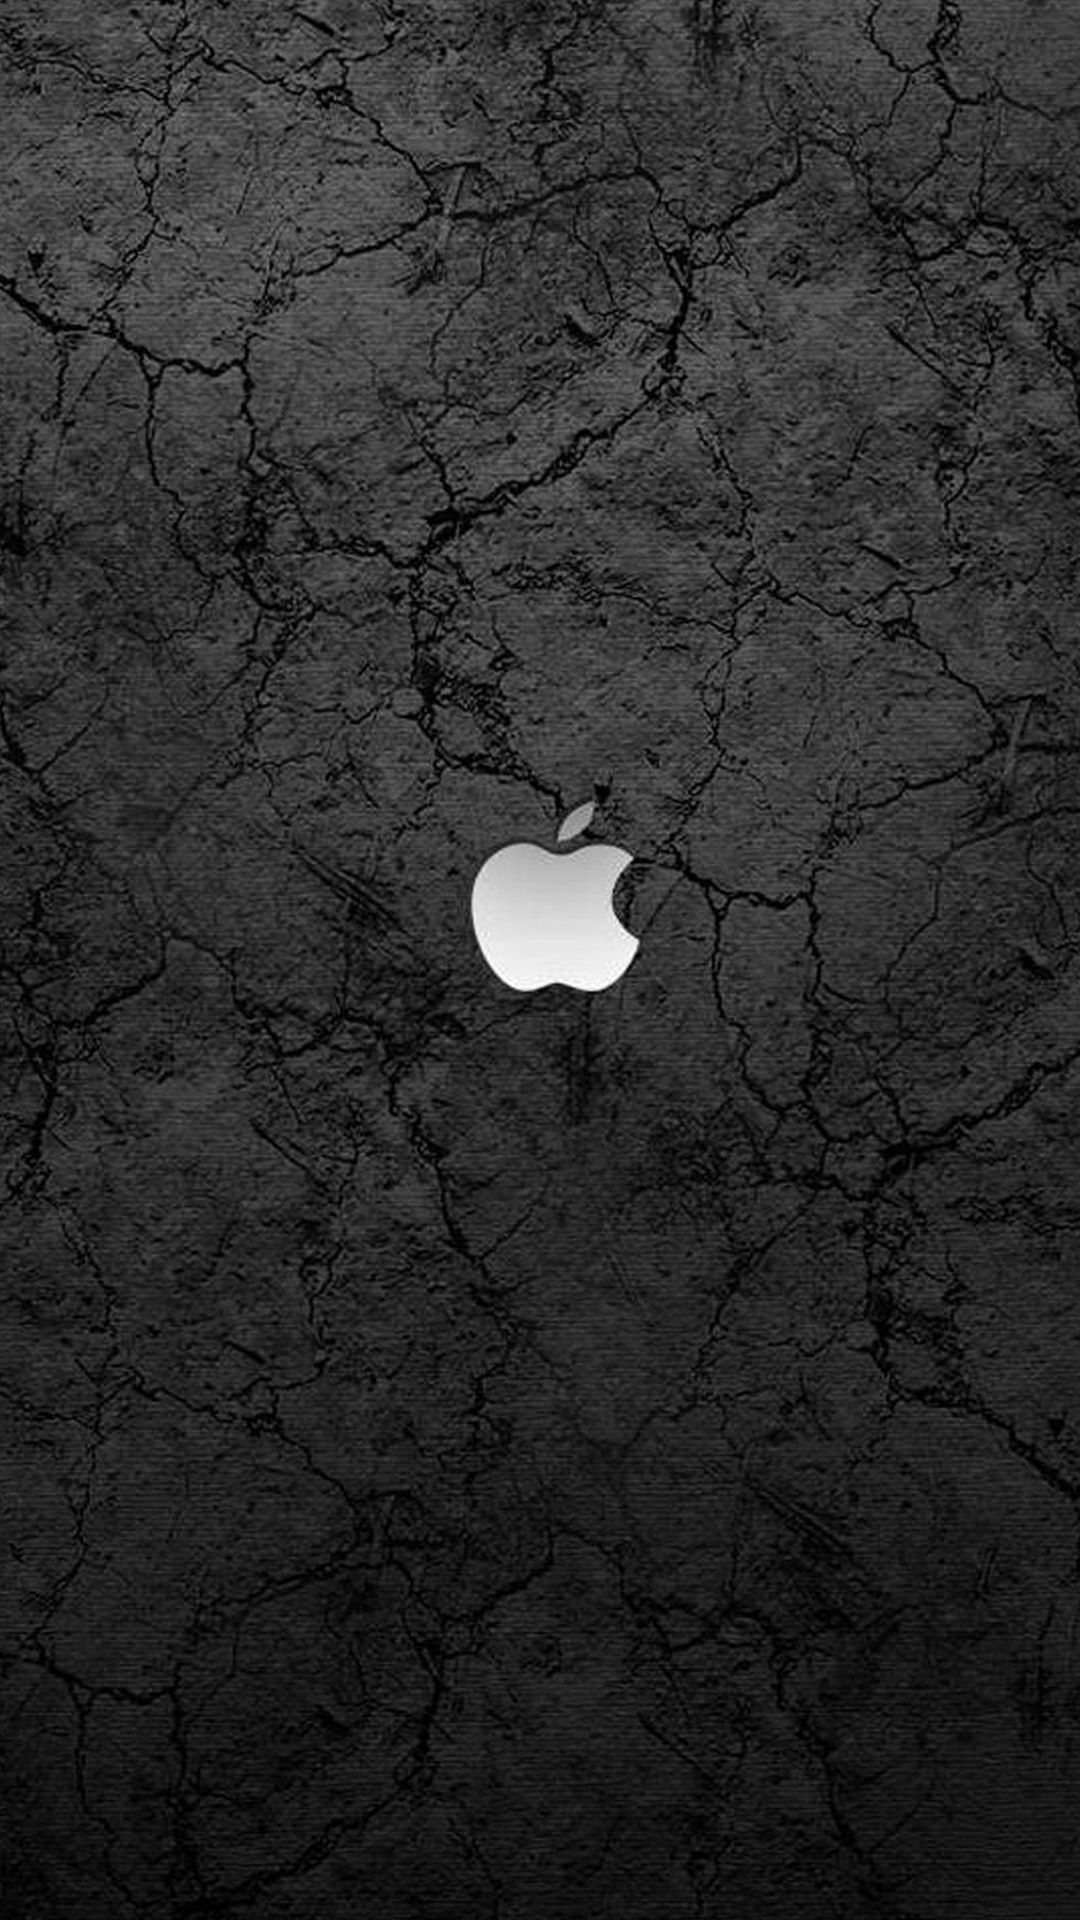 iPhone 6 Plus Wallpaper, 49 iPhone 6 Plus Background Collection. Black apple wallpaper, Black and white wallpaper iphone, iPhone 6s wallpaper